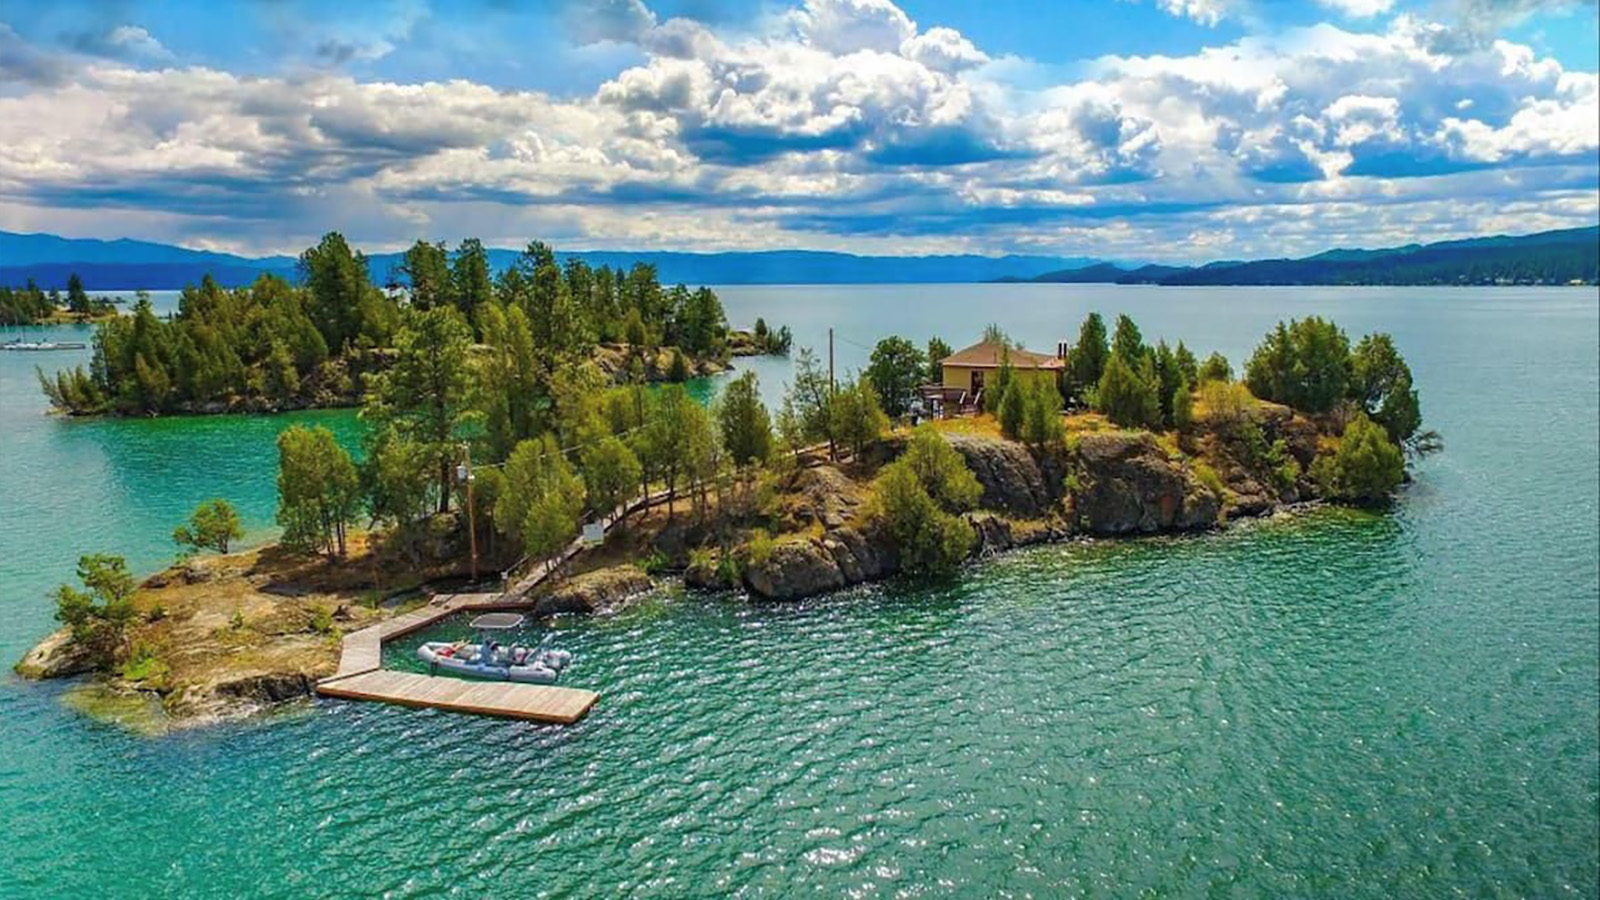 An aerial view of Emerland Island, a private island on airbnb